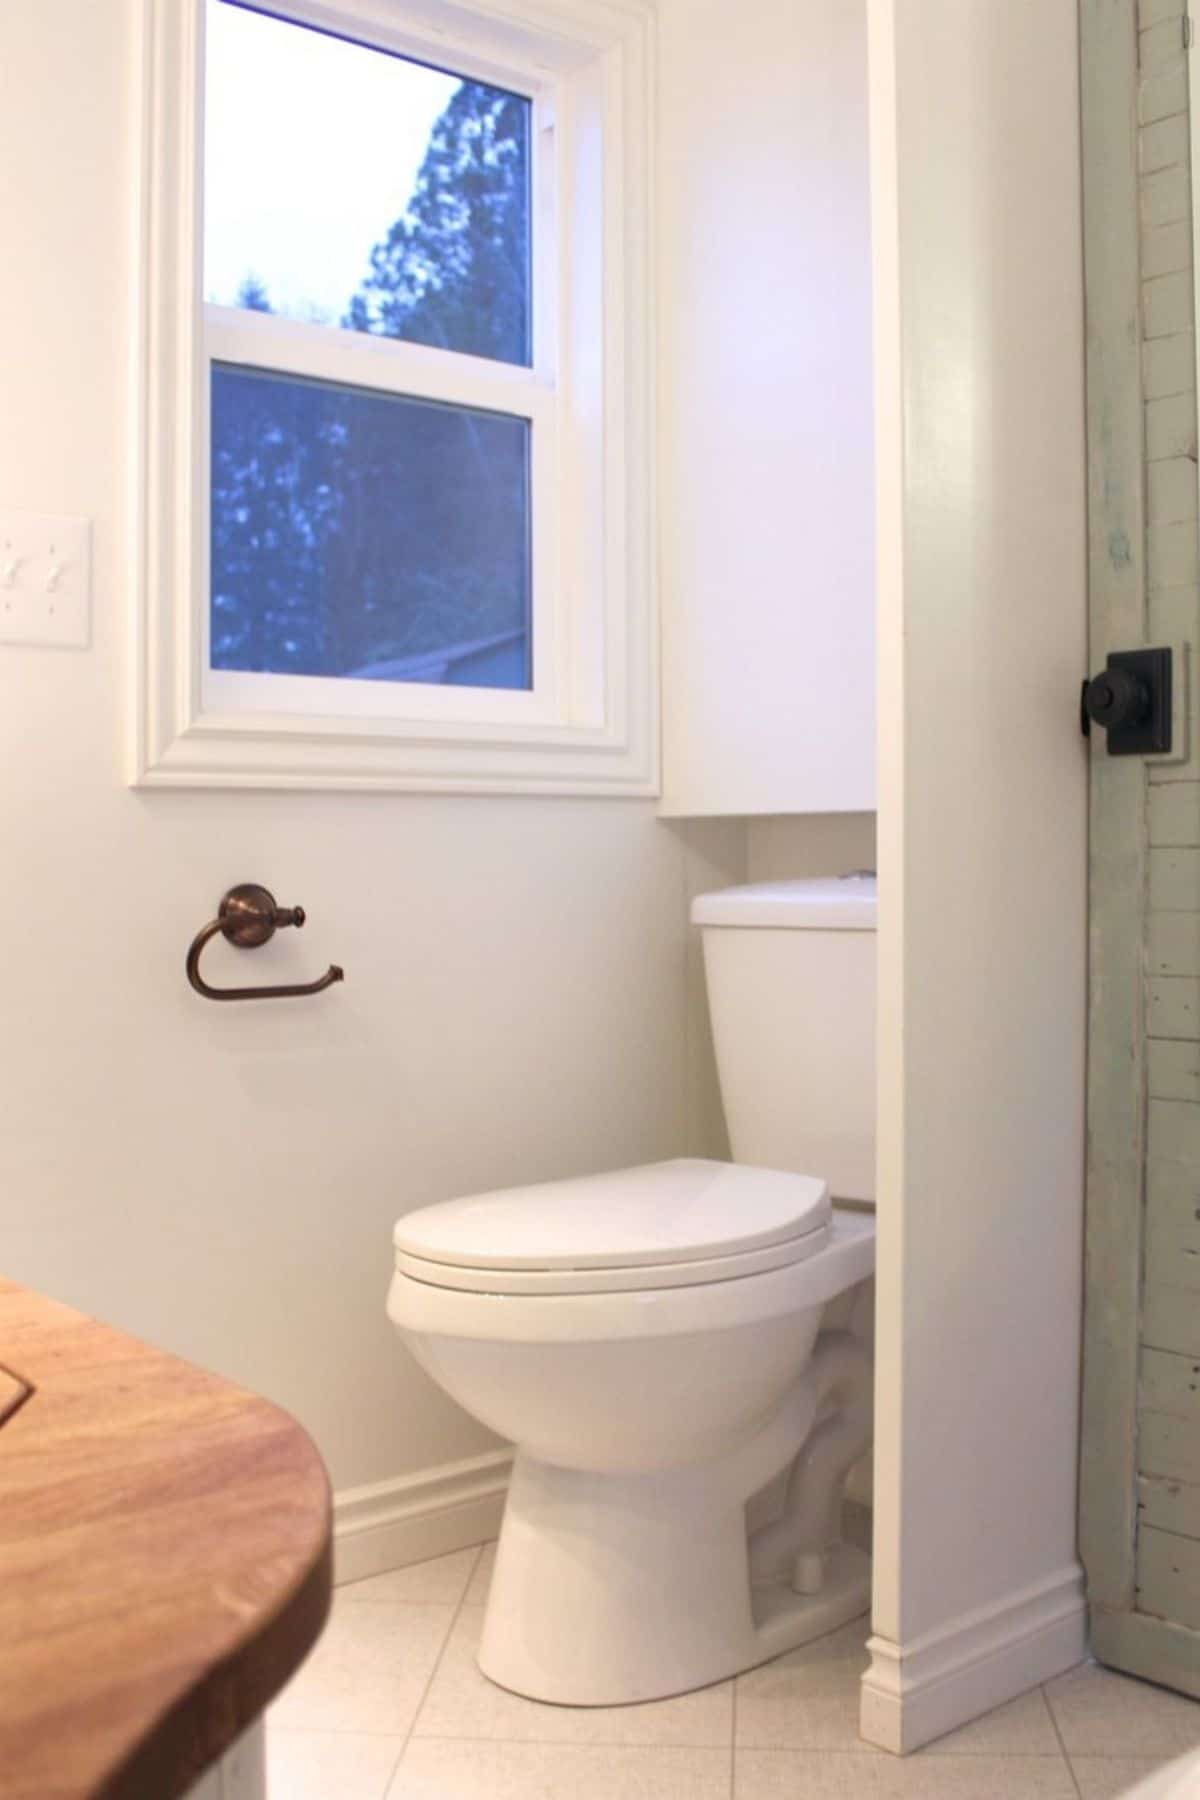 White toilet with white cabinet above inside bathroom door